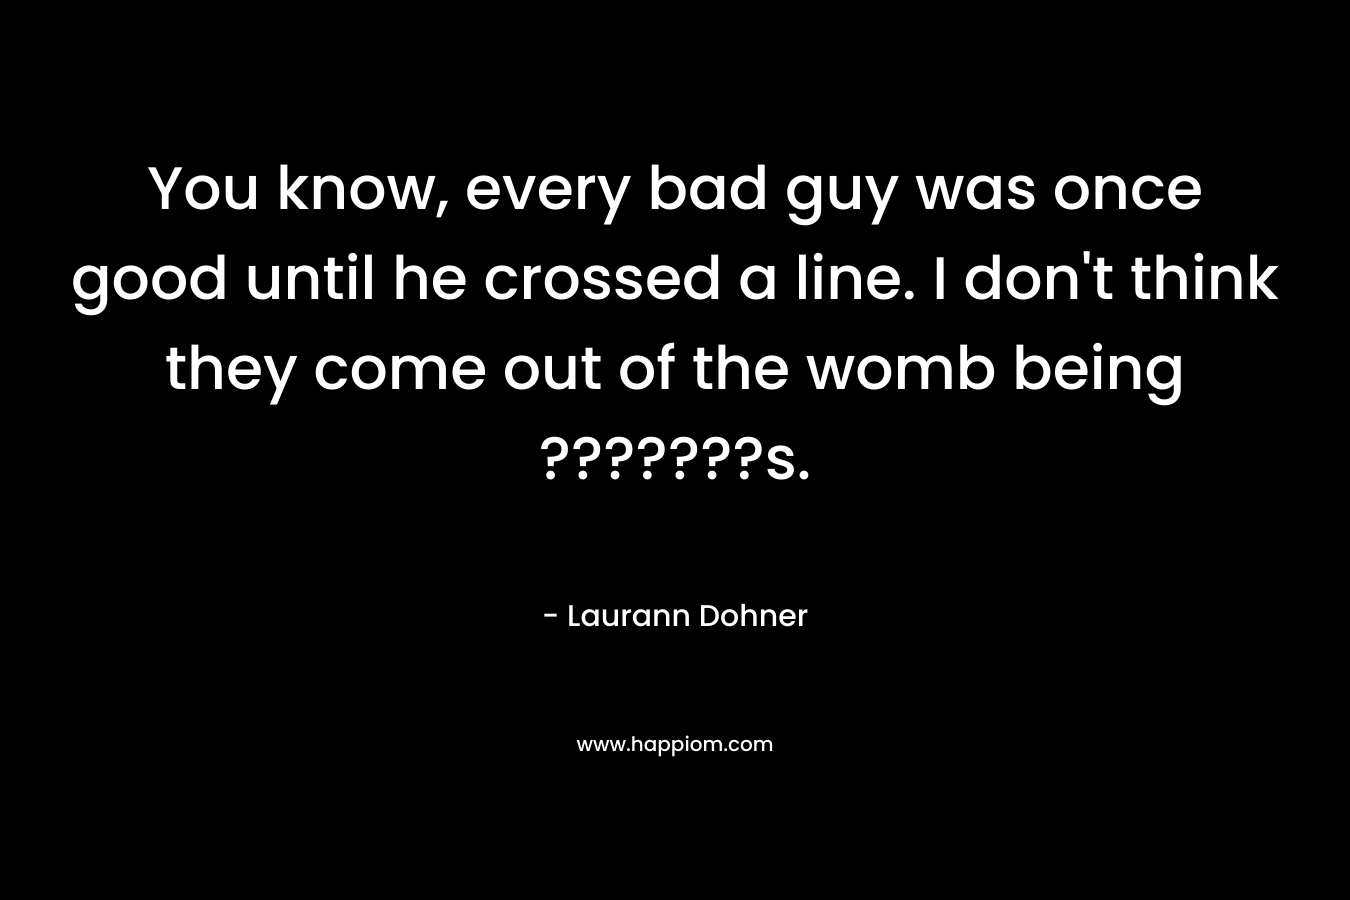 You know, every bad guy was once good until he crossed a line. I don’t think they come out of the womb being ???????s. – Laurann Dohner